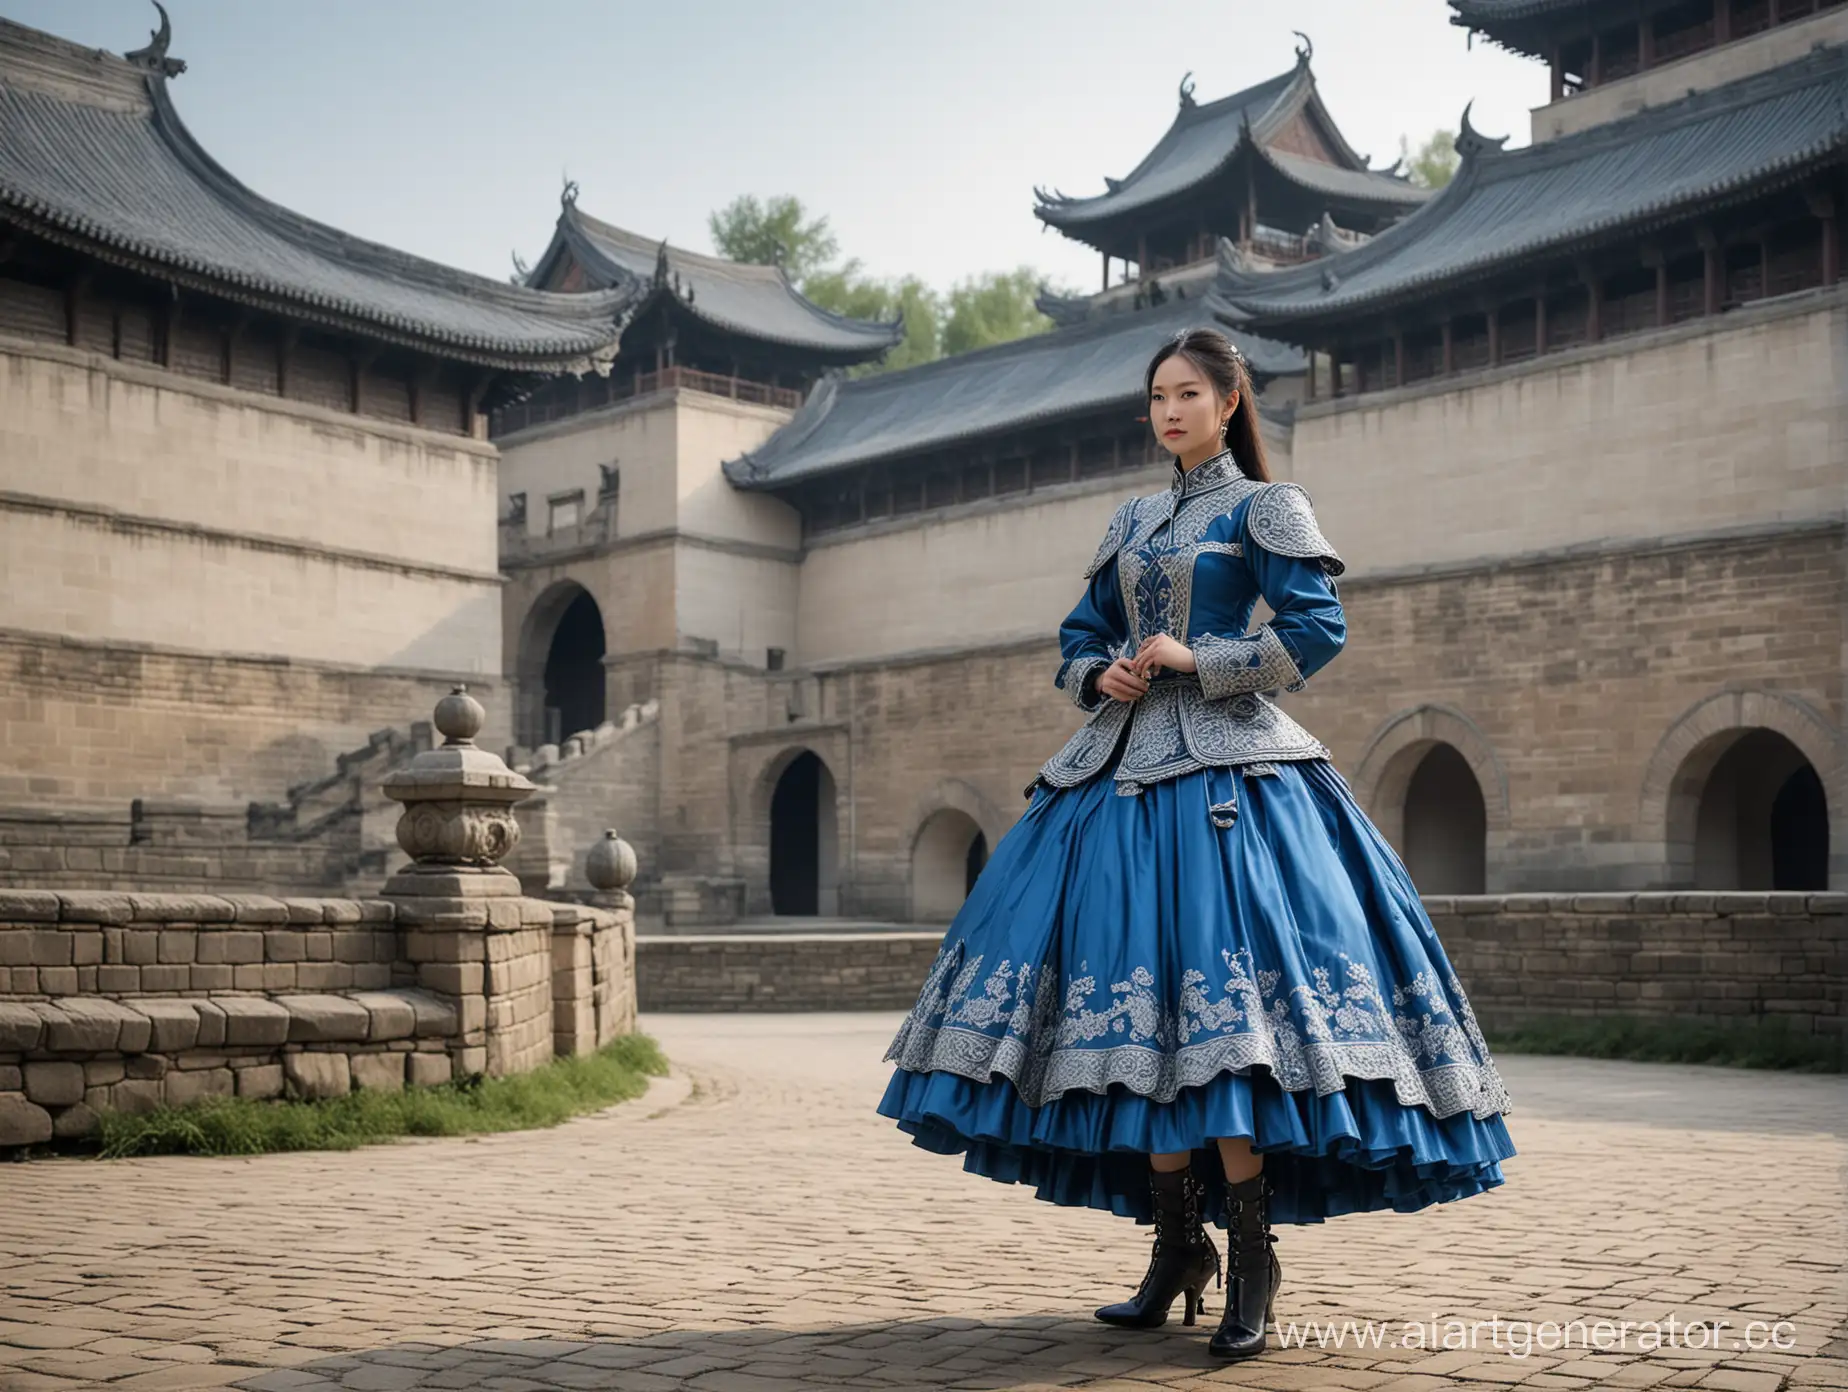 Warrior-Woman-Miao-Ying-in-Shiny-Blue-Armor-on-Chinese-Castle-Battlefield